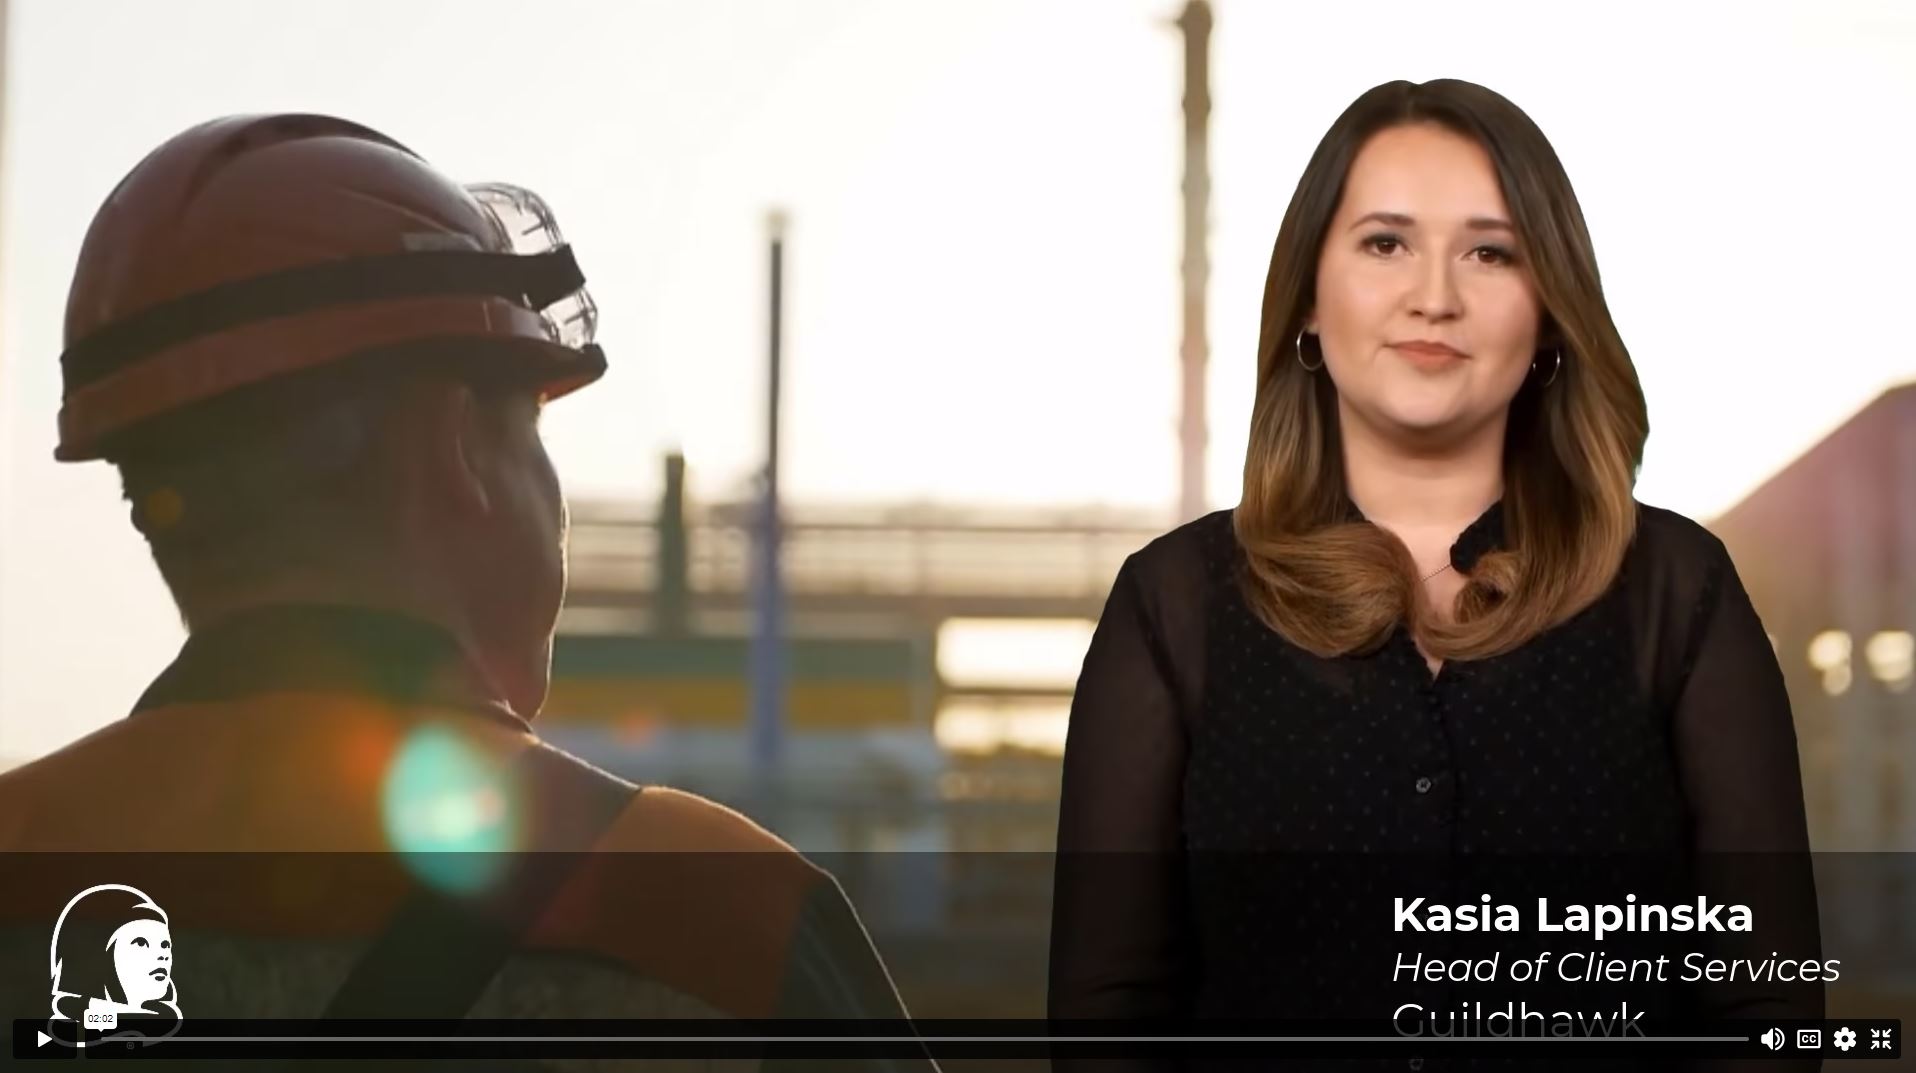 Screenshot from Guildhawk mulilingual video featuring Digital Human avatar of Kasia and construction industry worker